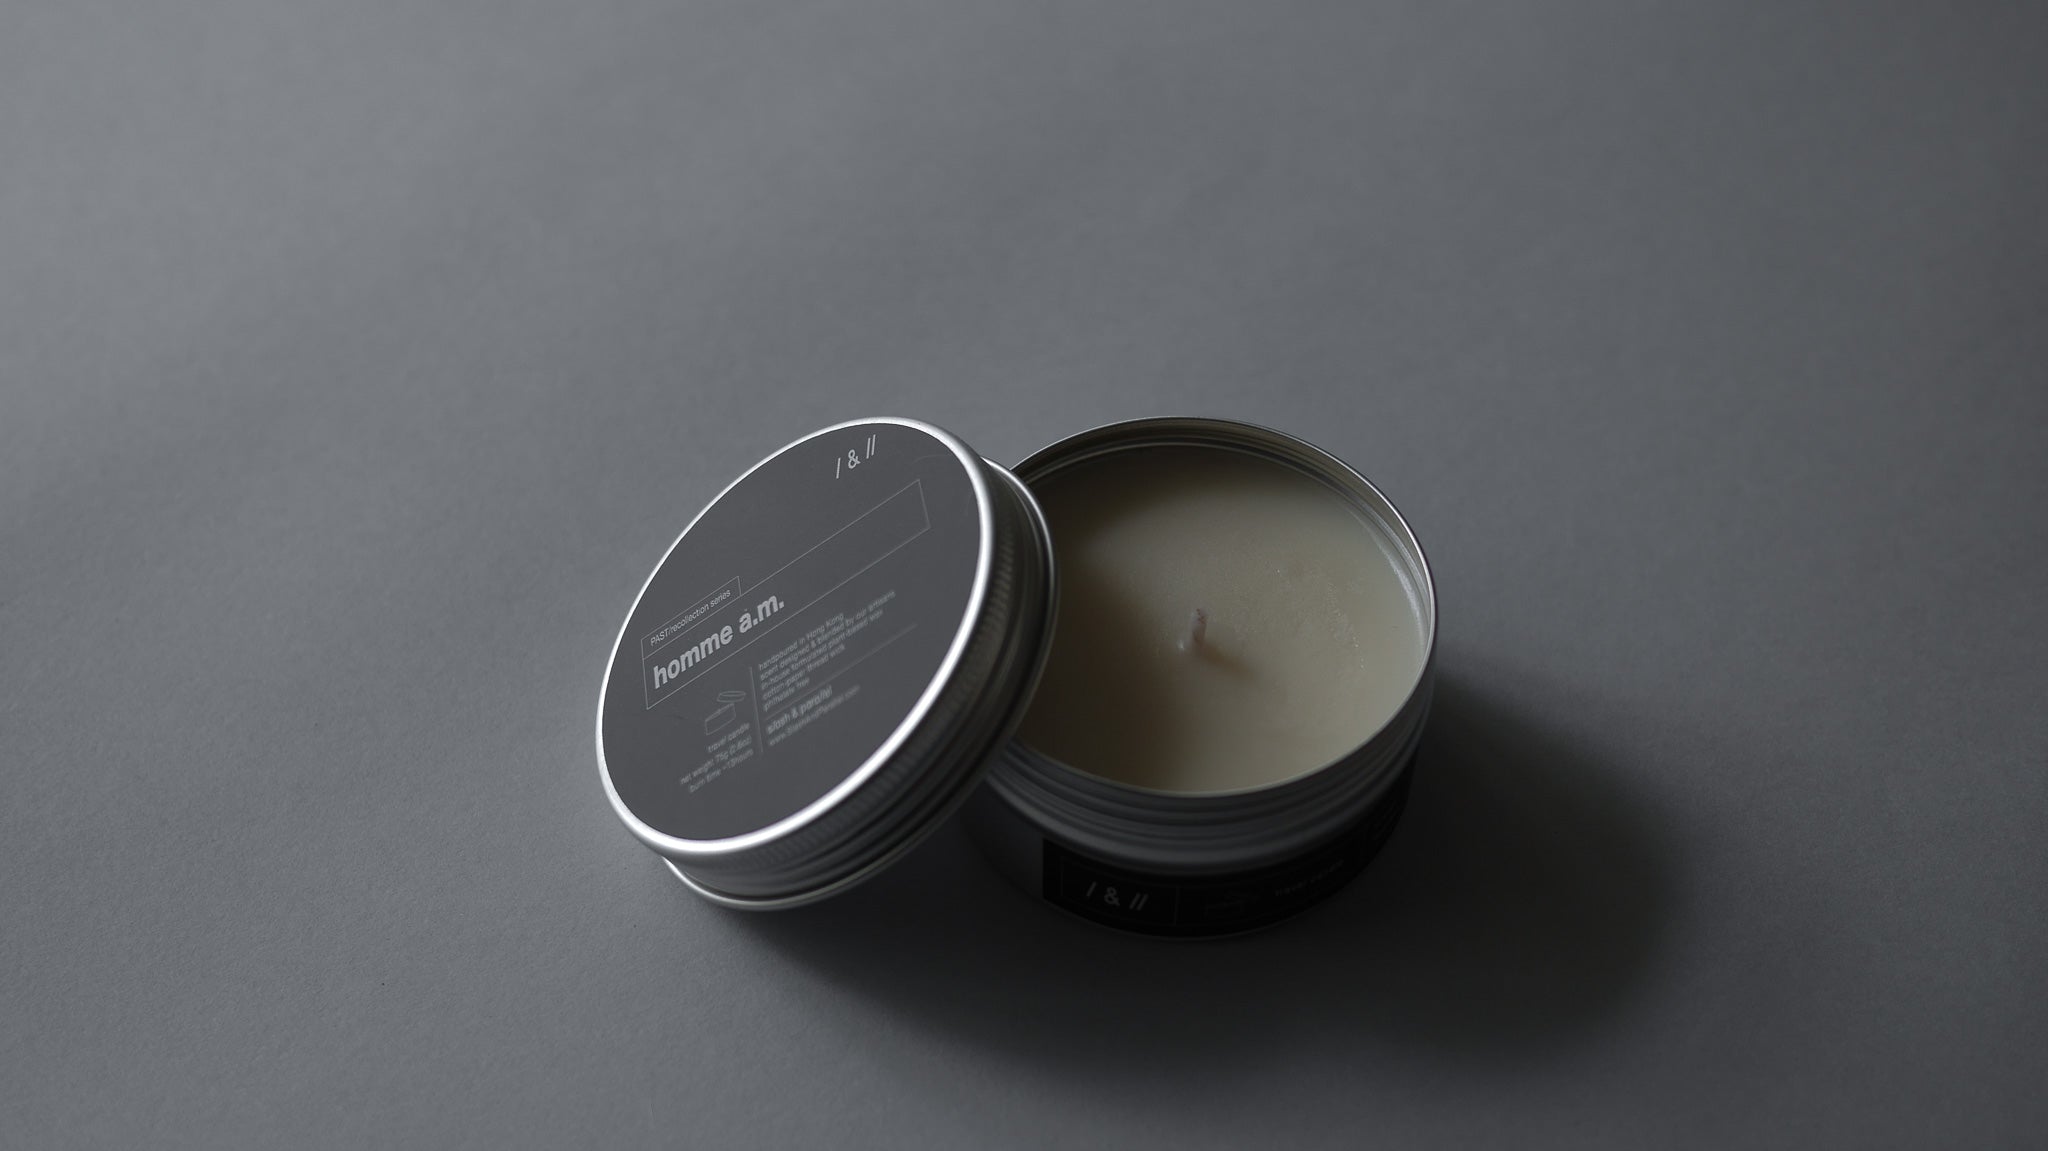 homme - a.m. / travel candle // recollection series